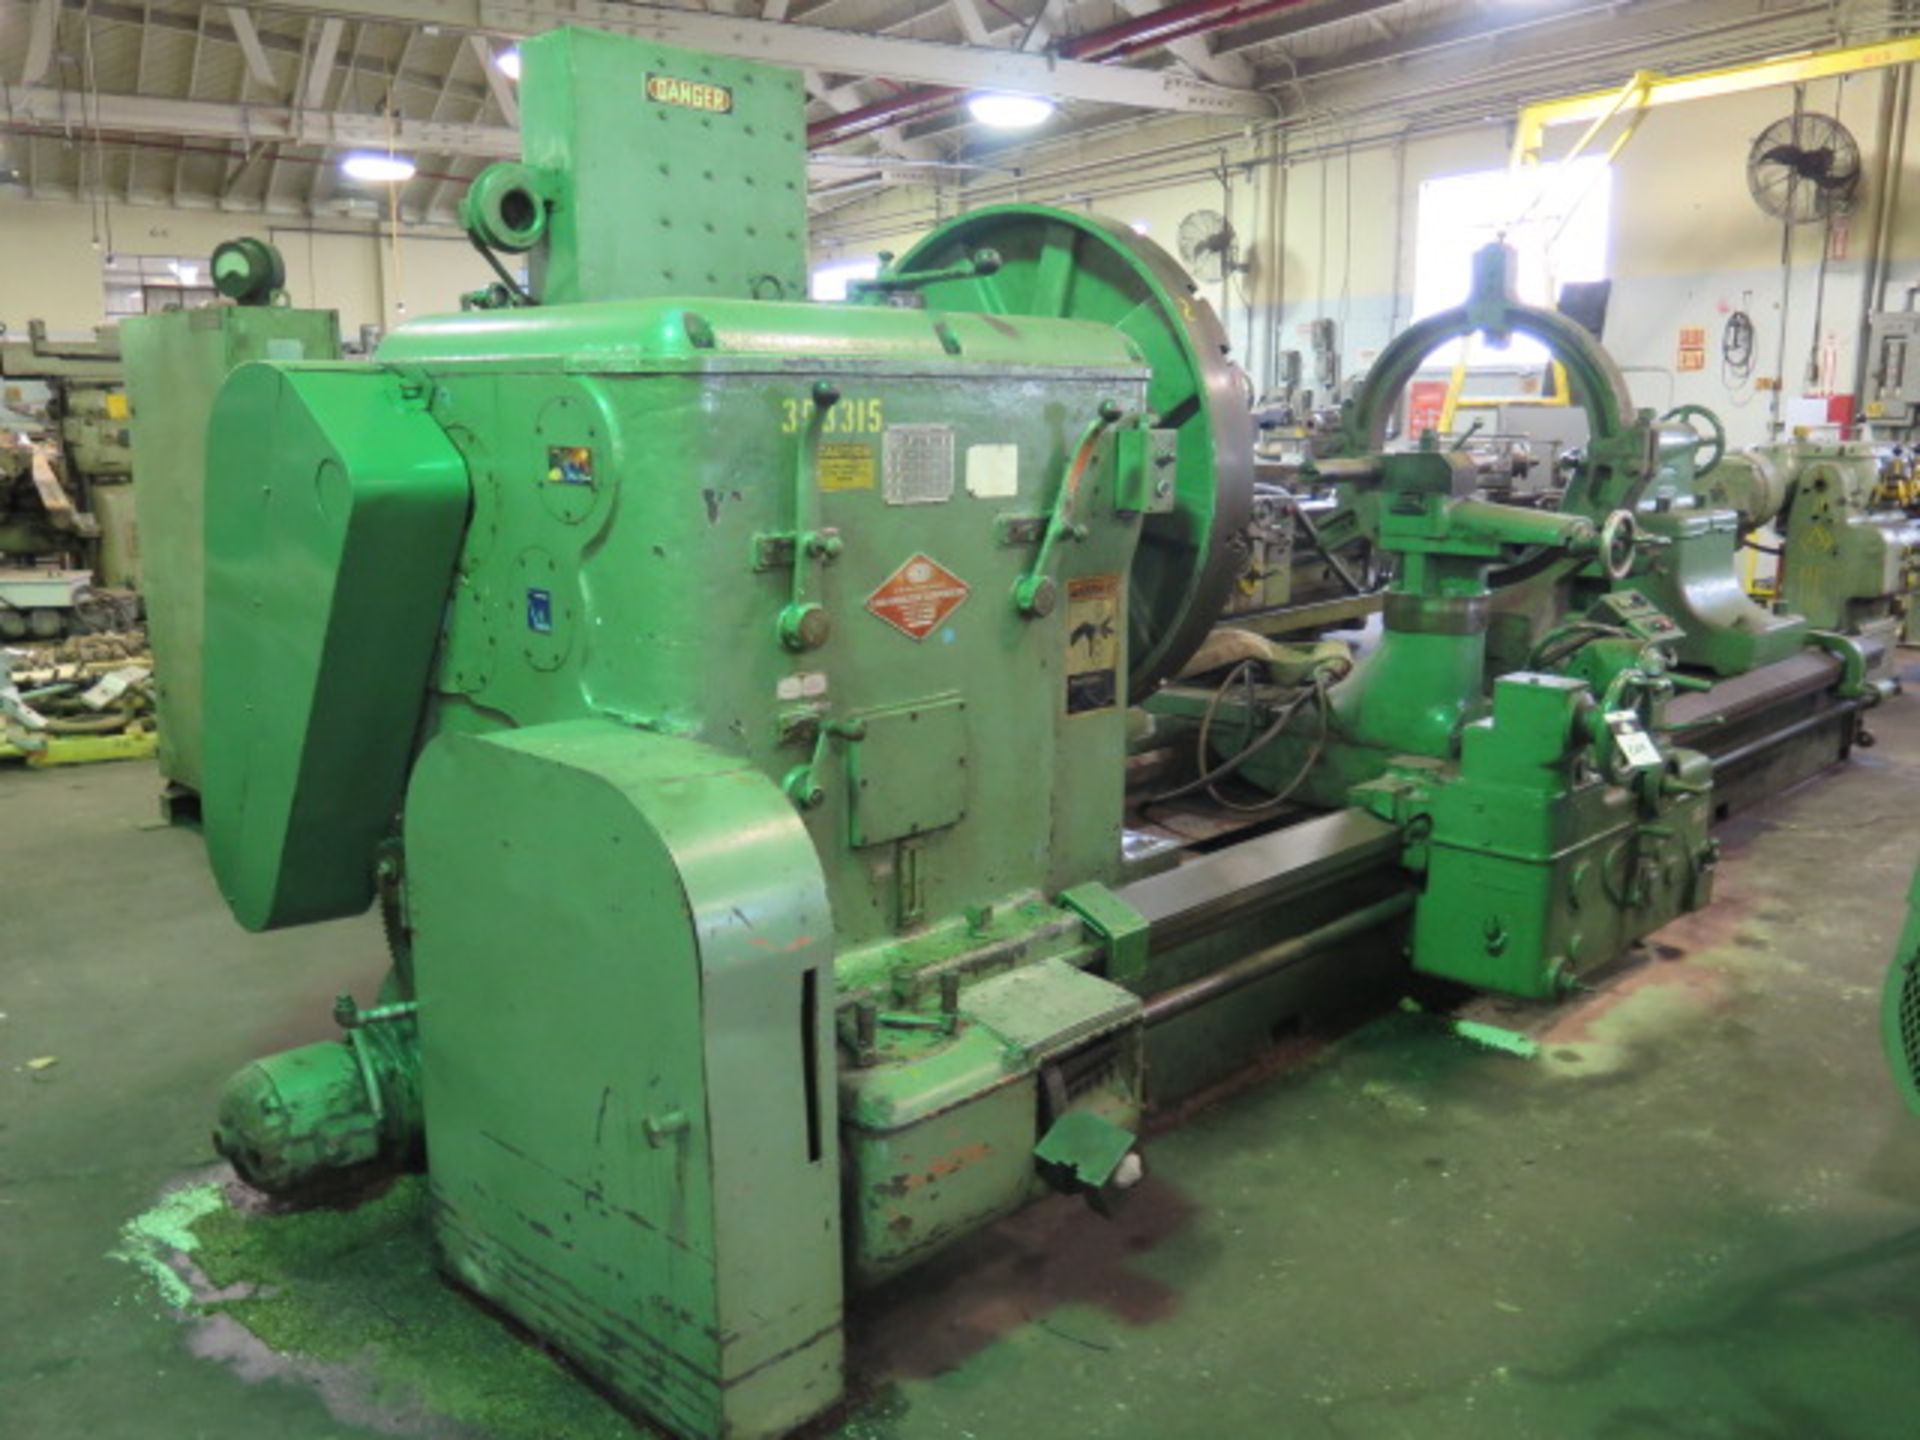 Niles A54P 62” x 140” Lathe s/n 23579 w/ 3.94-232 RPM, Inch Threading, Steady Rest, SOLD AS IS